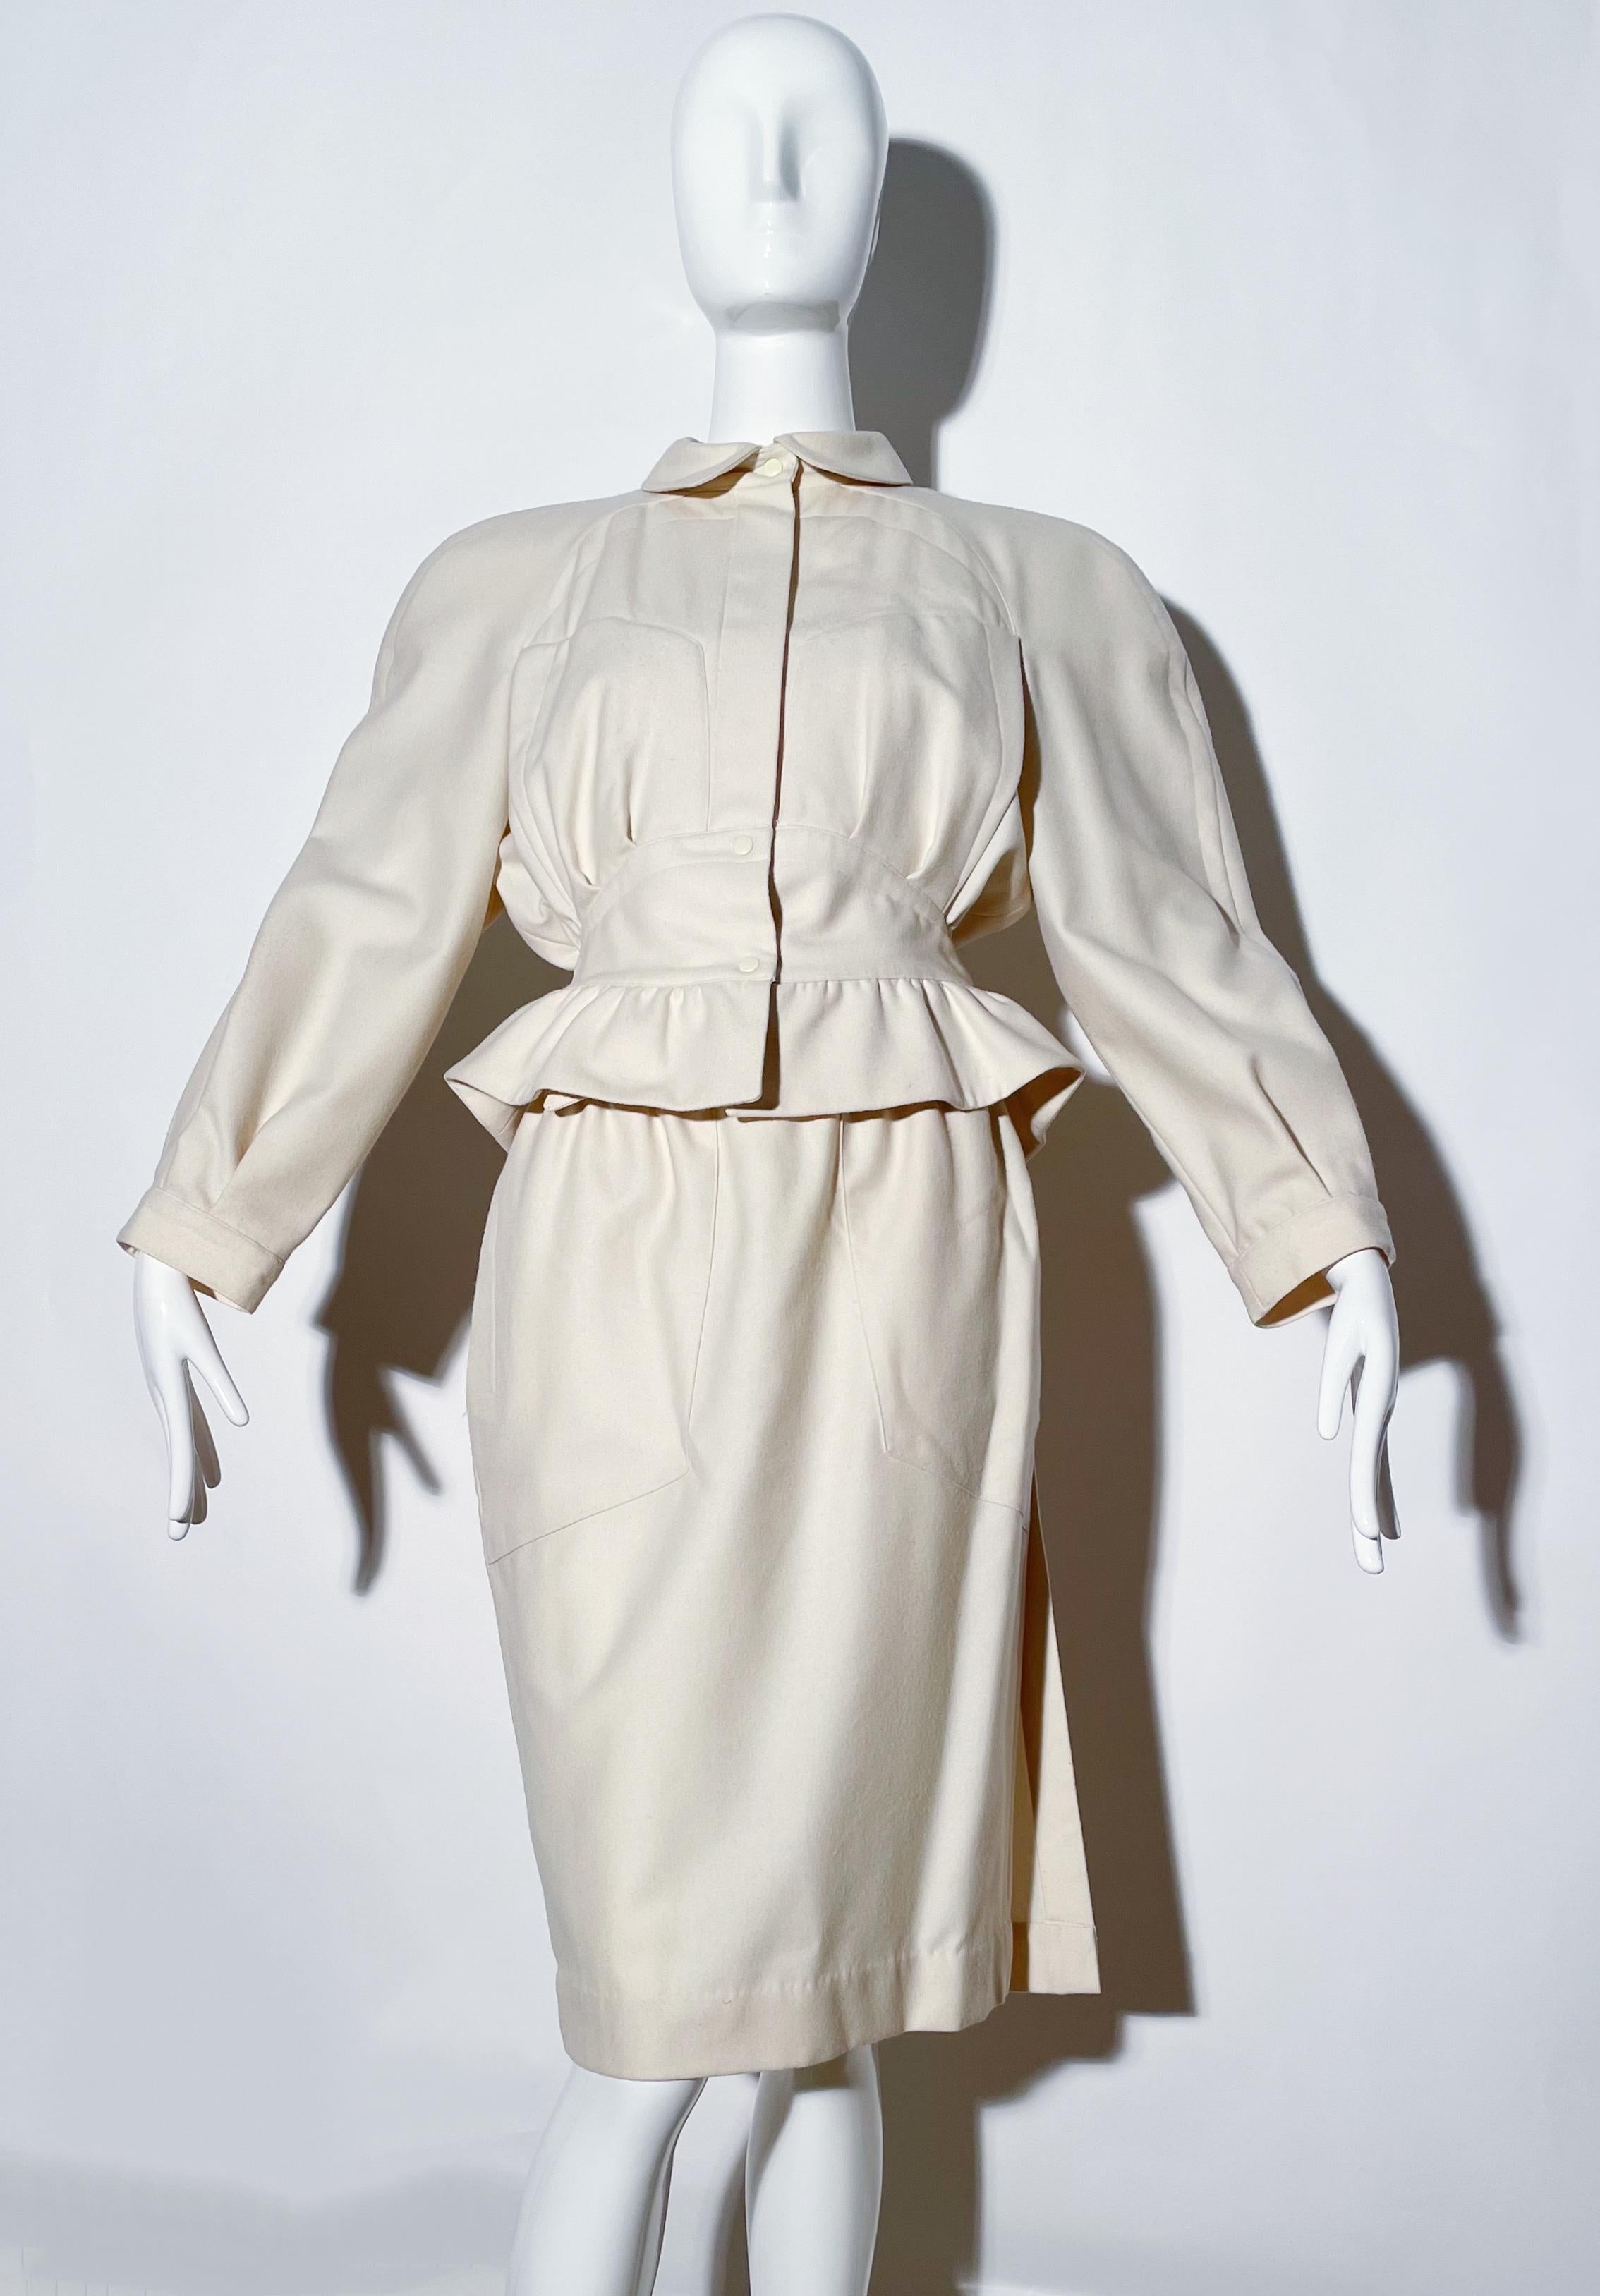 Creme peplum skirt suit. Collared. Shoulder pads. Front snap closures on blazer. Skirt is wrap style. 
*Condition: Great vintage condition. Chipped paint on belt loops. 

Measurements Taken Laying Flat (inches)—
Shoulder to Shoulder: 17 in.
Sleeve